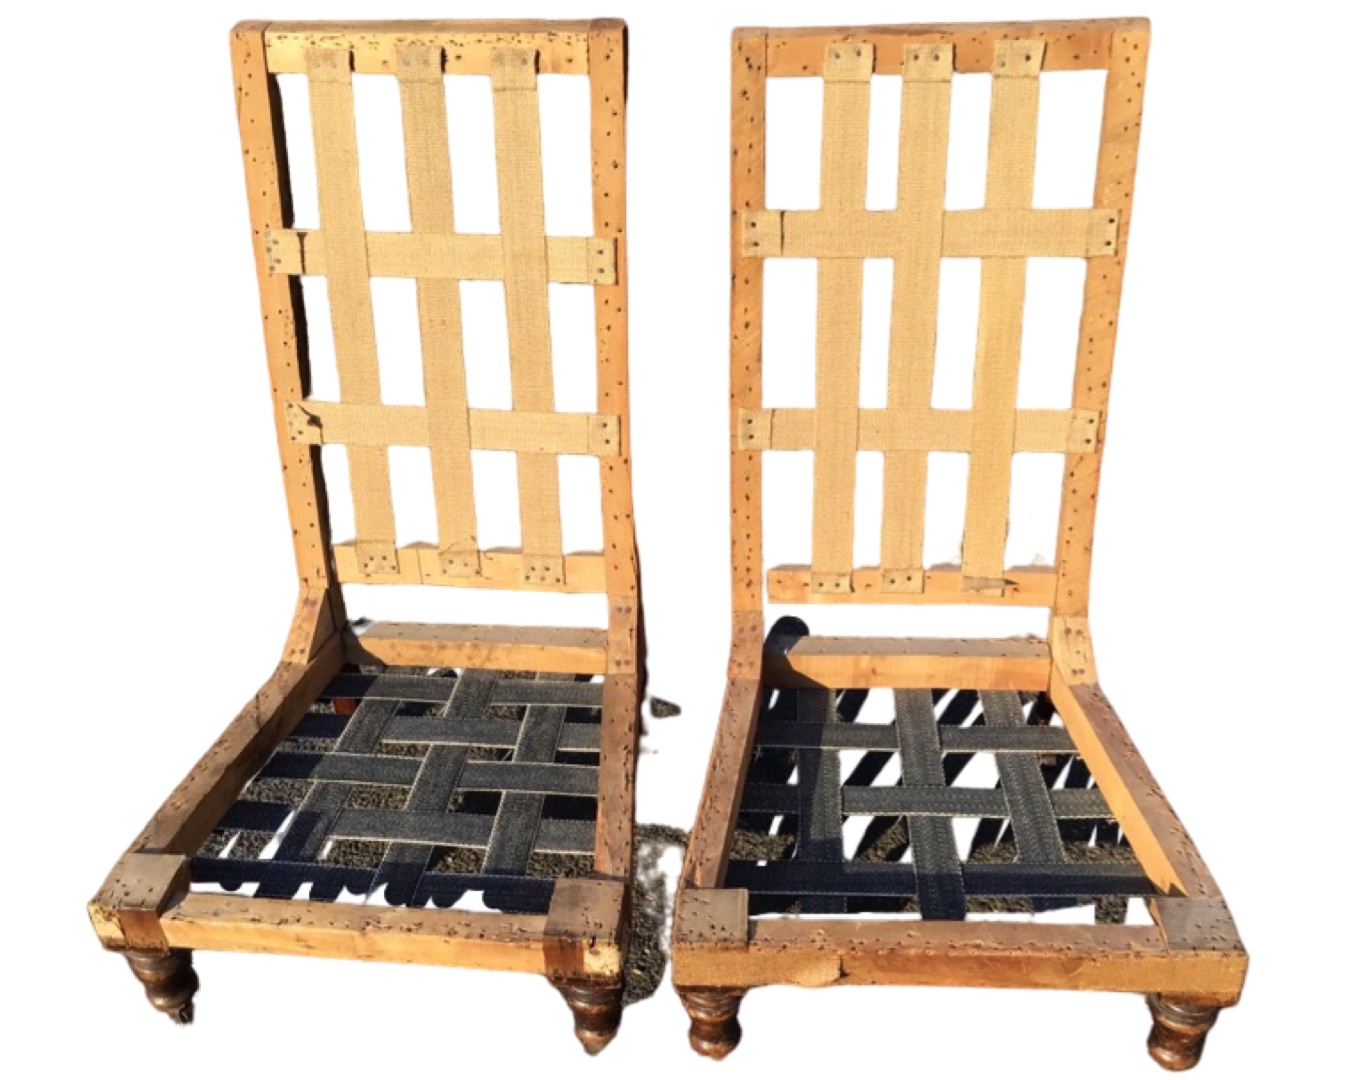 A pair of "stripped back" and re-webbed Victorian chairs, the frames with high backs and tapering